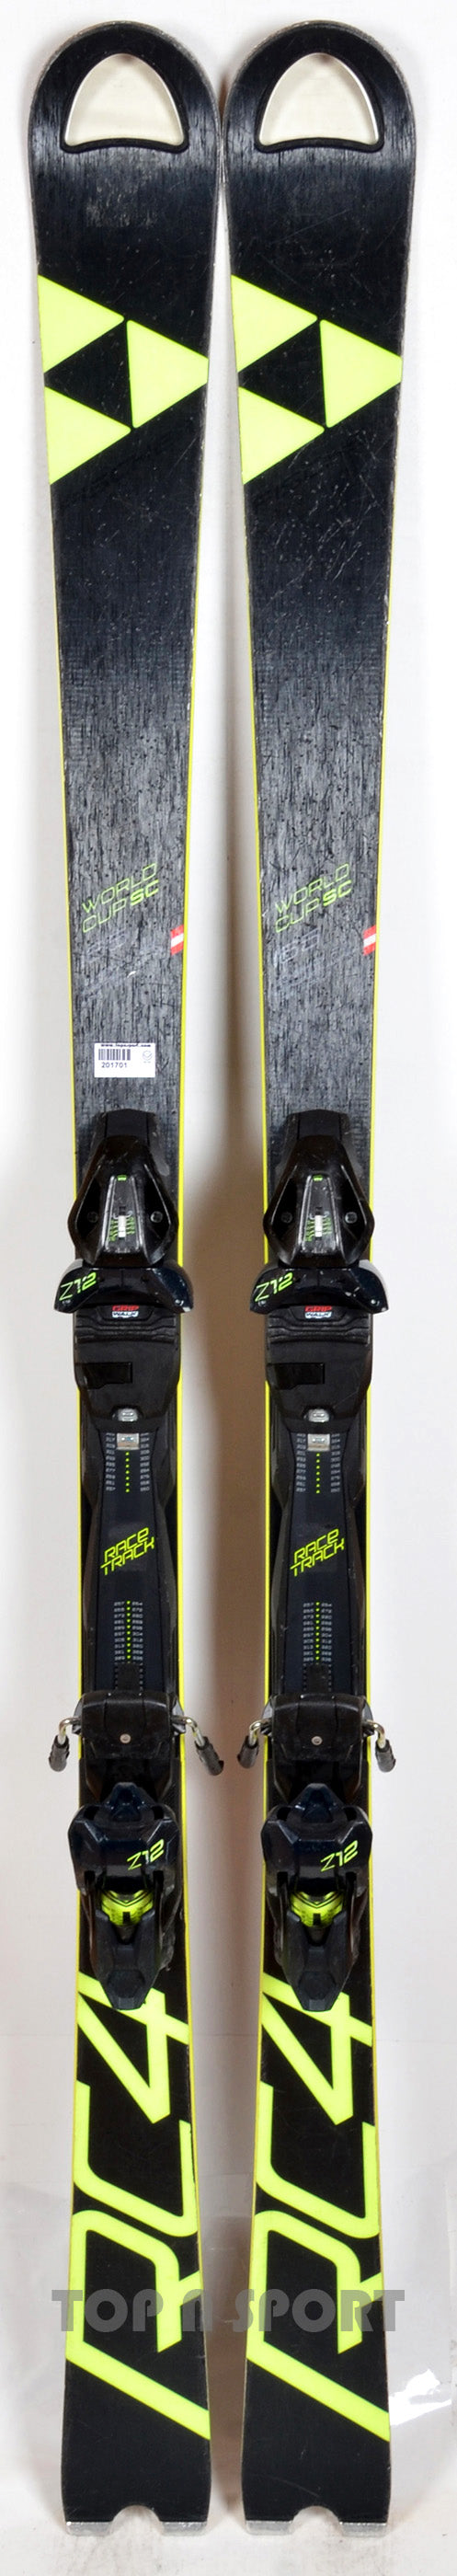 Fischer RC4 WORLDCUP SC black - skis d'occasion